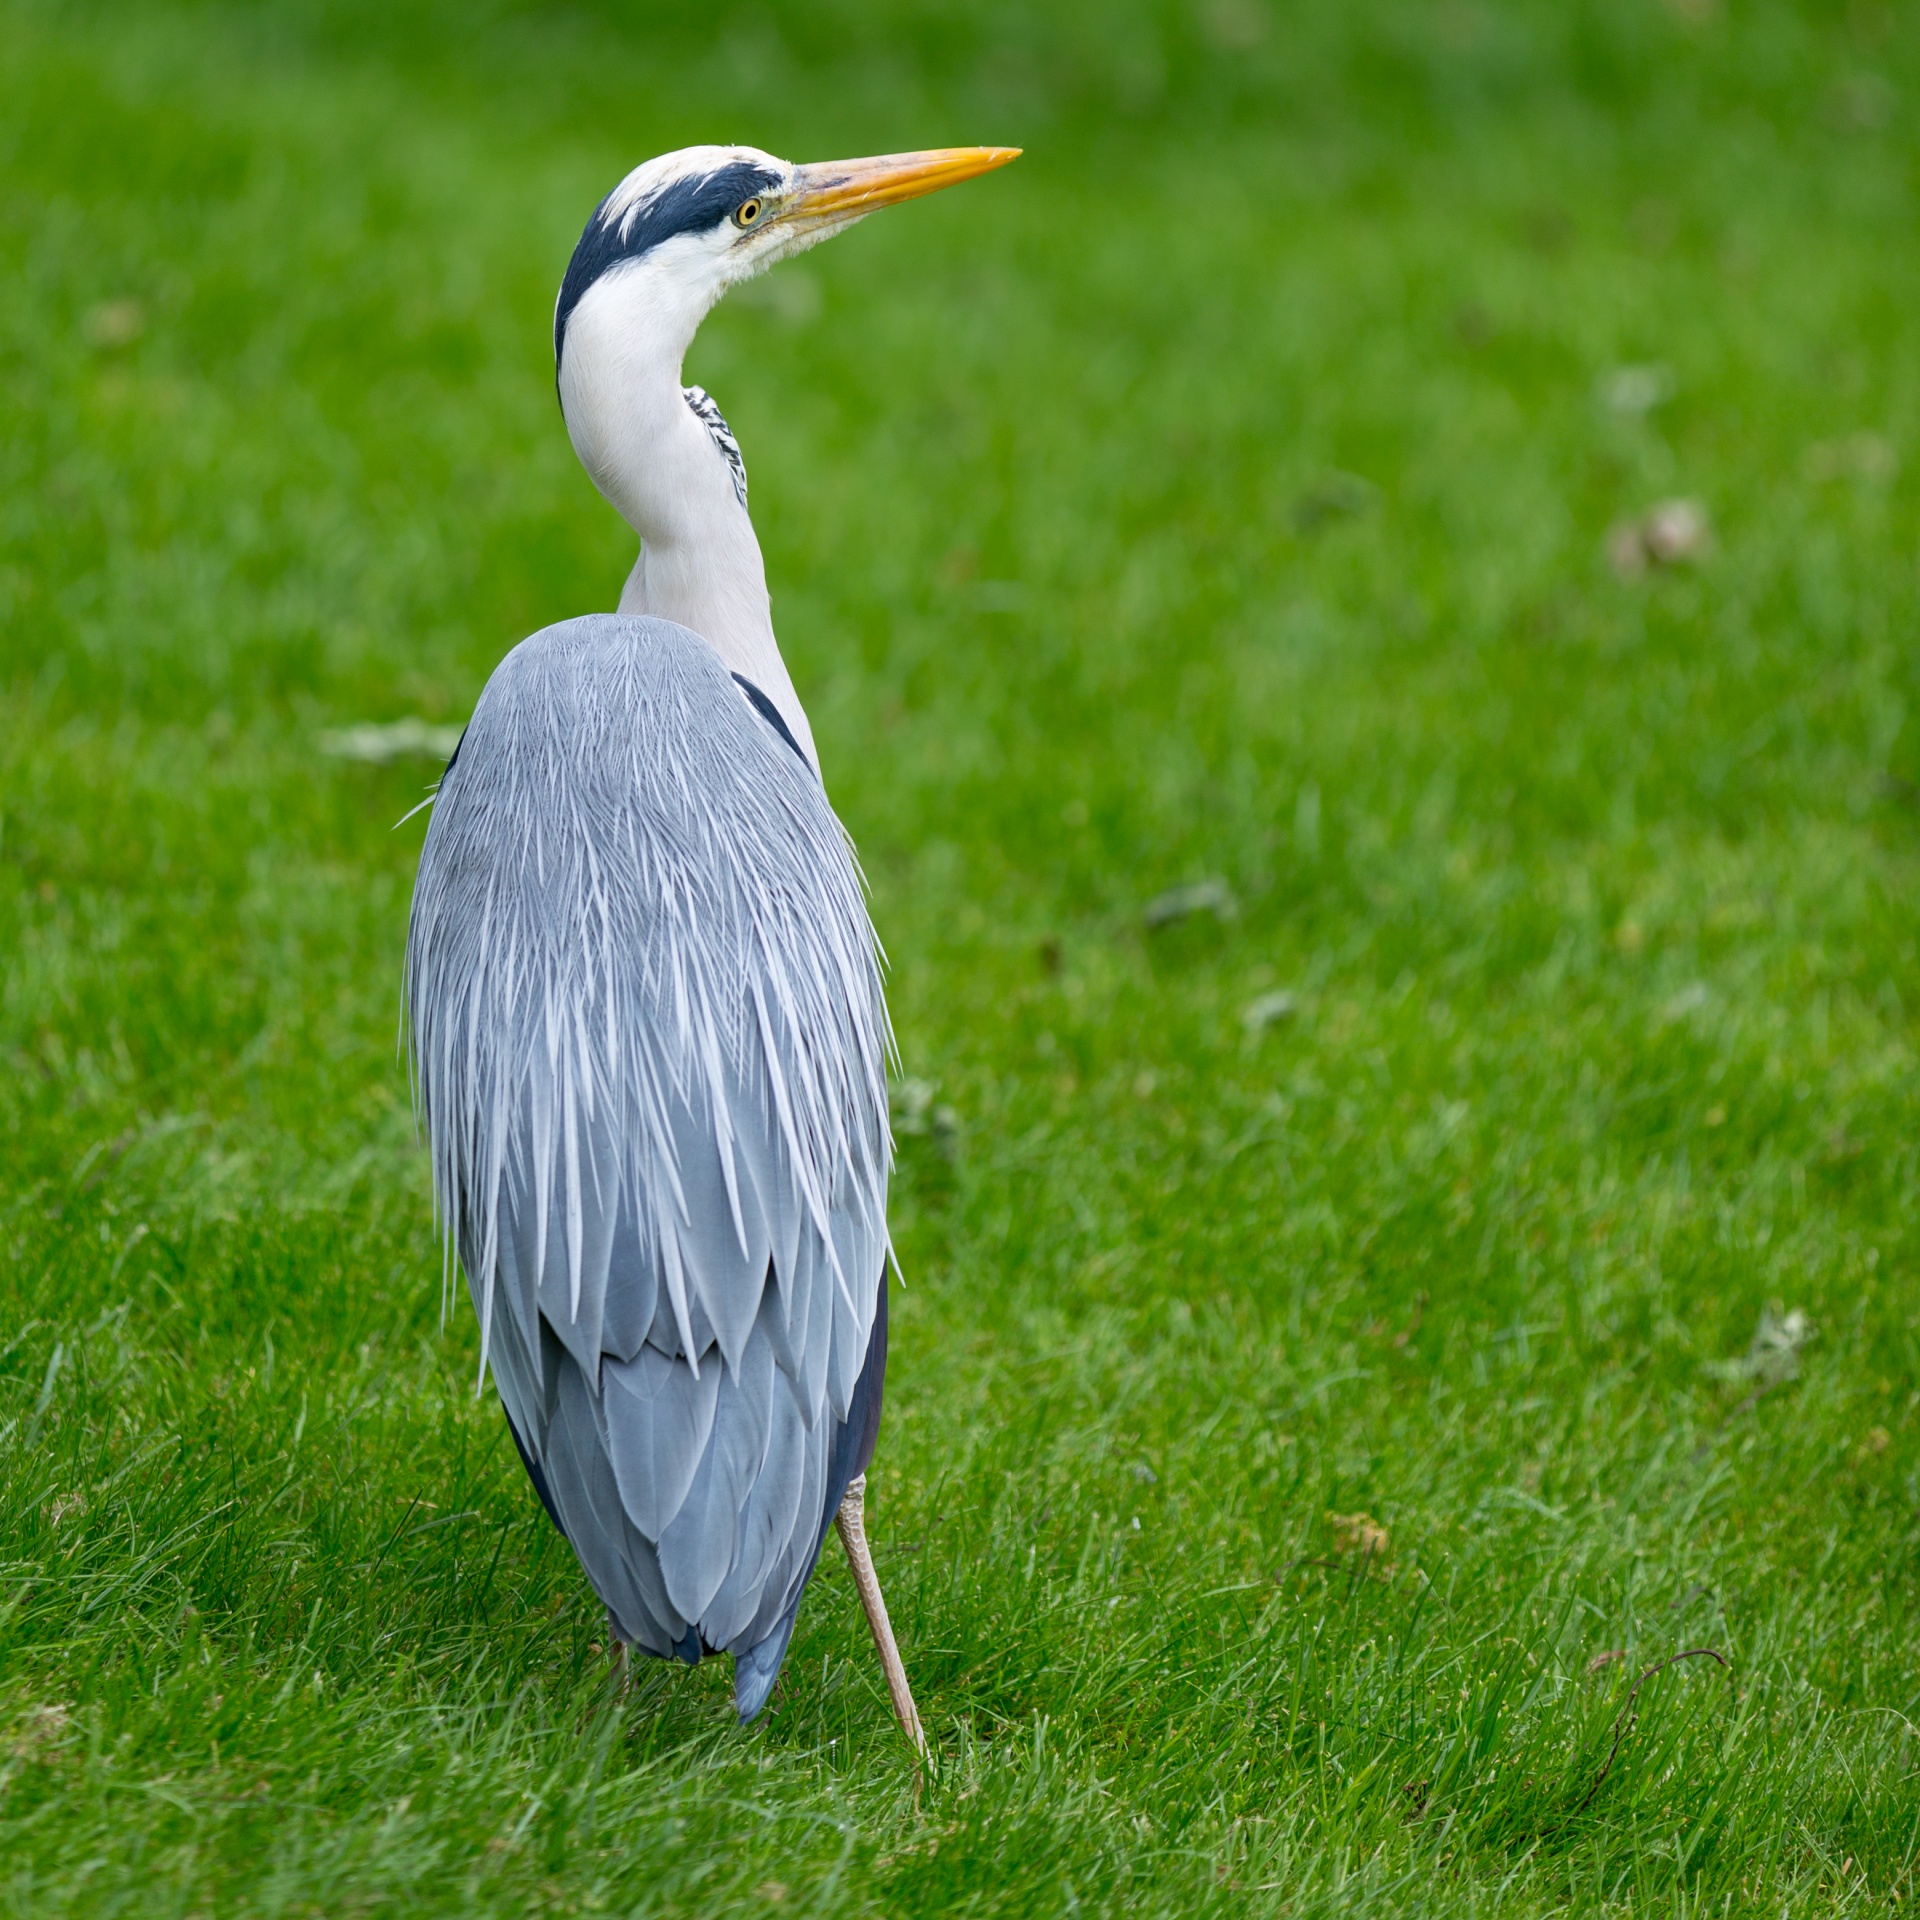 Great Blue Heron standing on grass